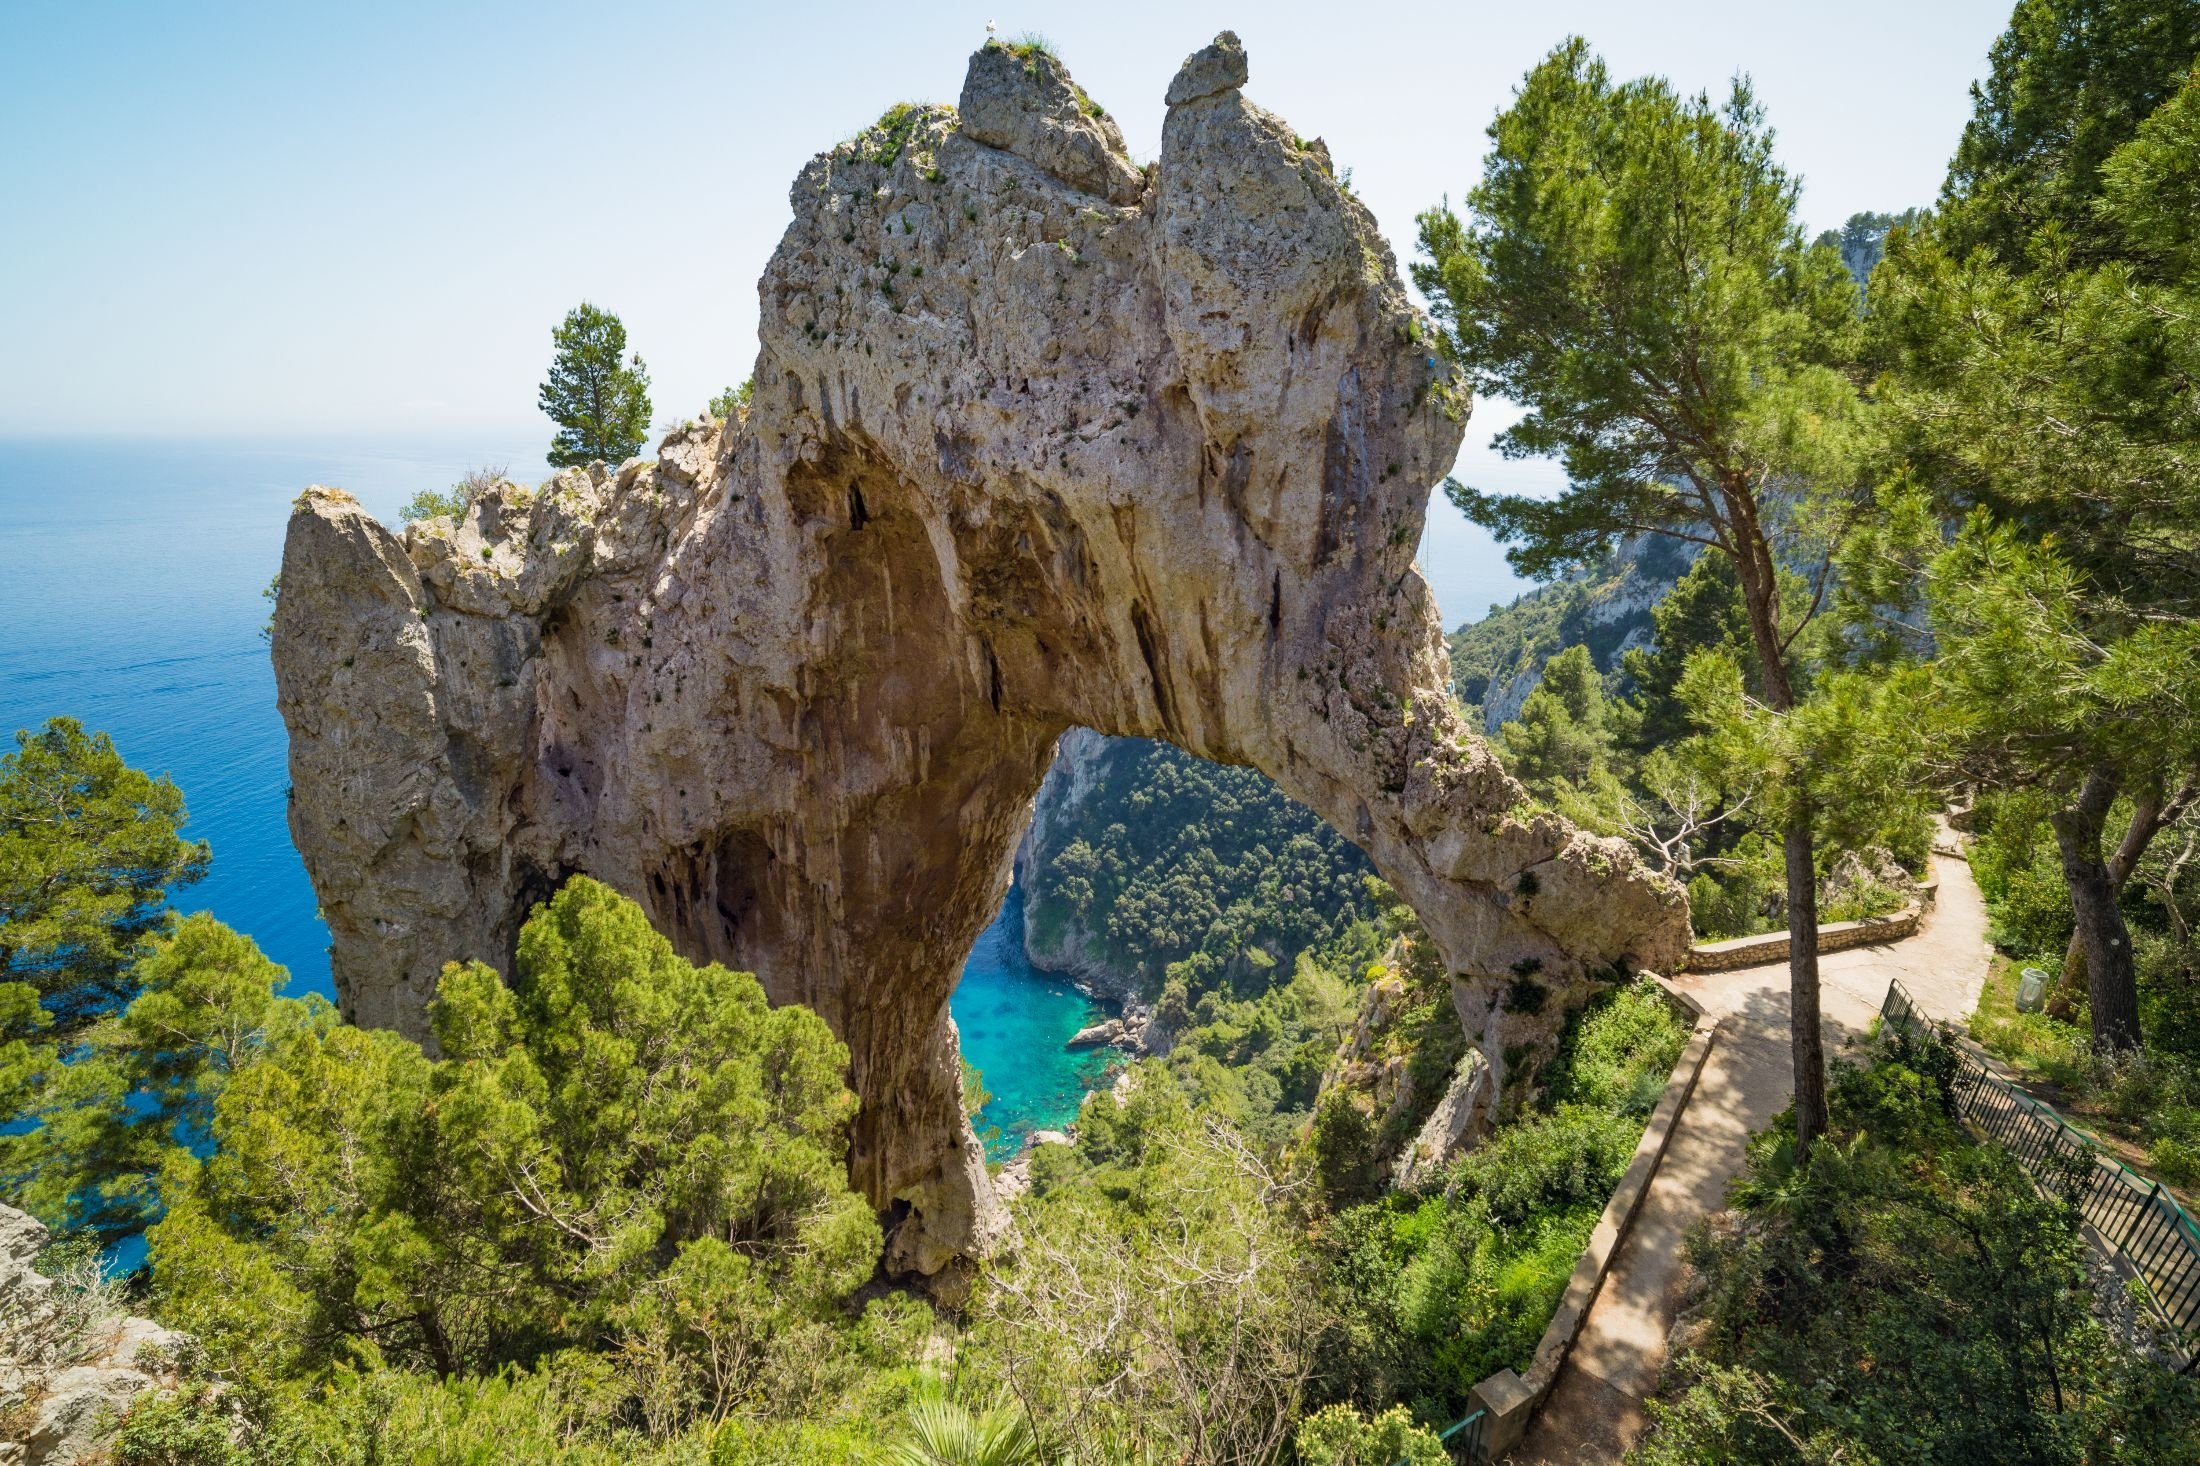 Arco Naturale, the natural arch on coast of the island of Capri, Italy. (Shutterstock Photo)